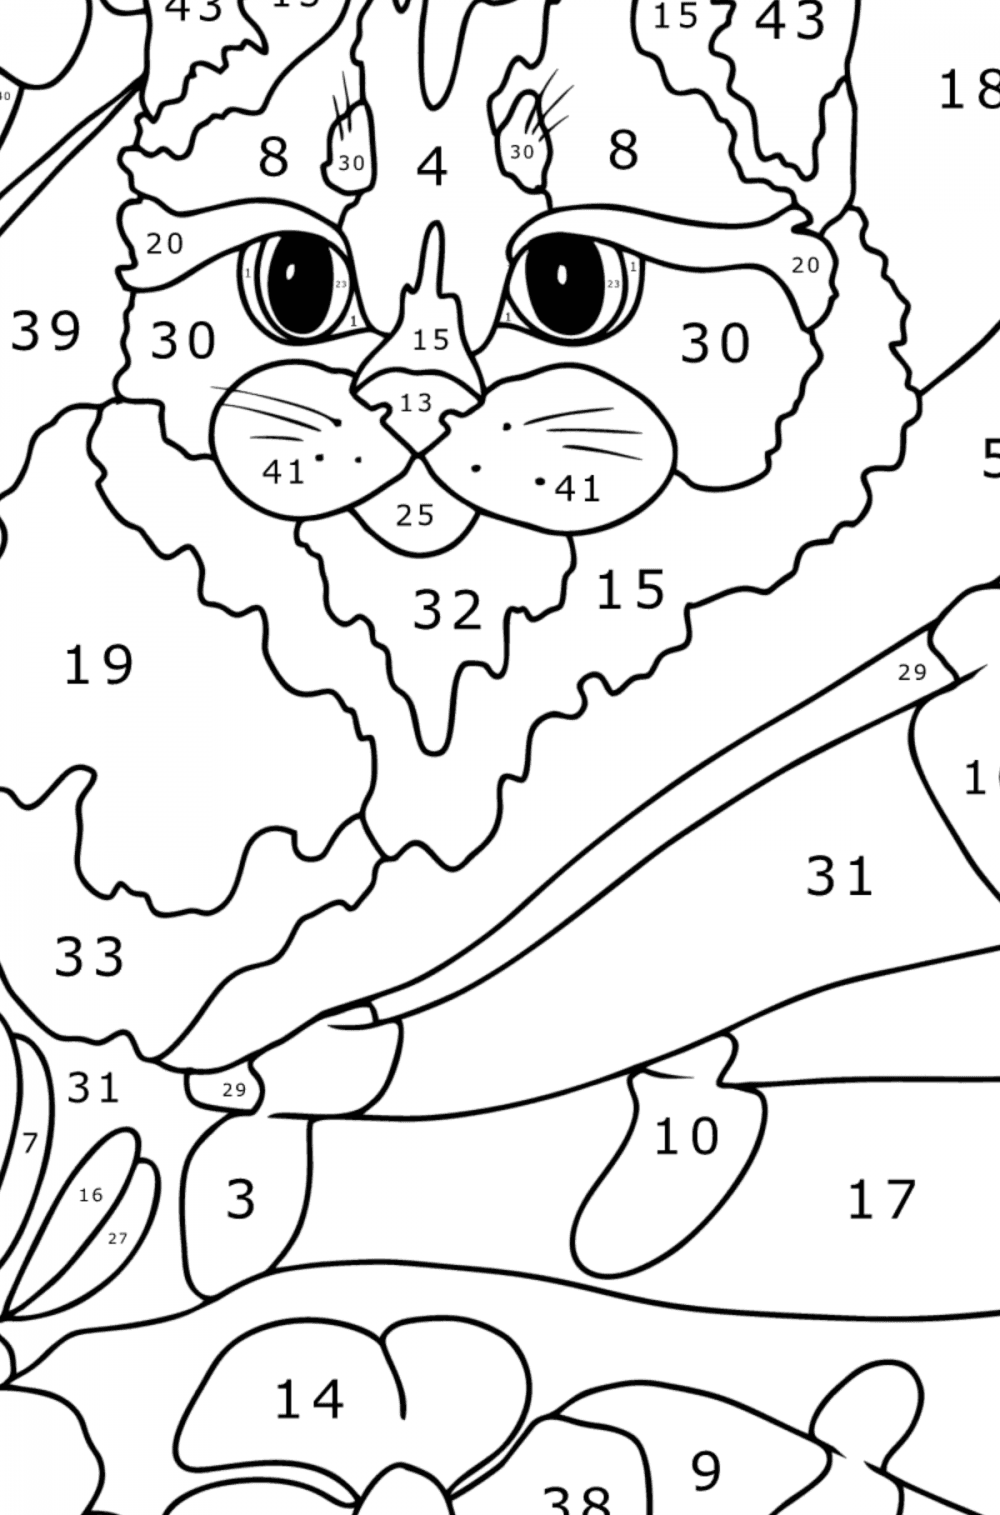 Gray kitten - Cats Coloring pages for Adults Online and Print